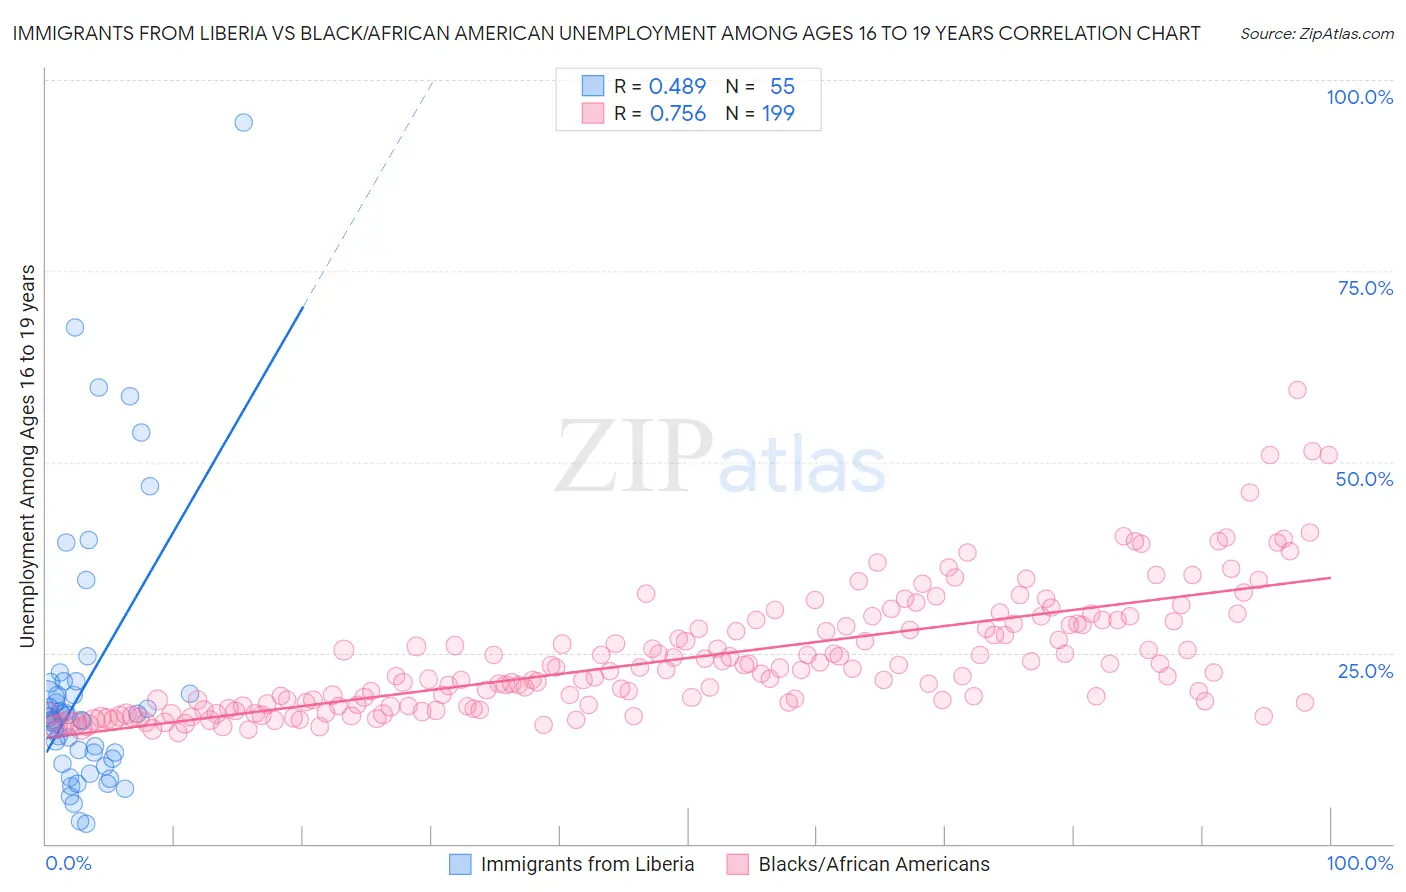 Immigrants from Liberia vs Black/African American Unemployment Among Ages 16 to 19 years